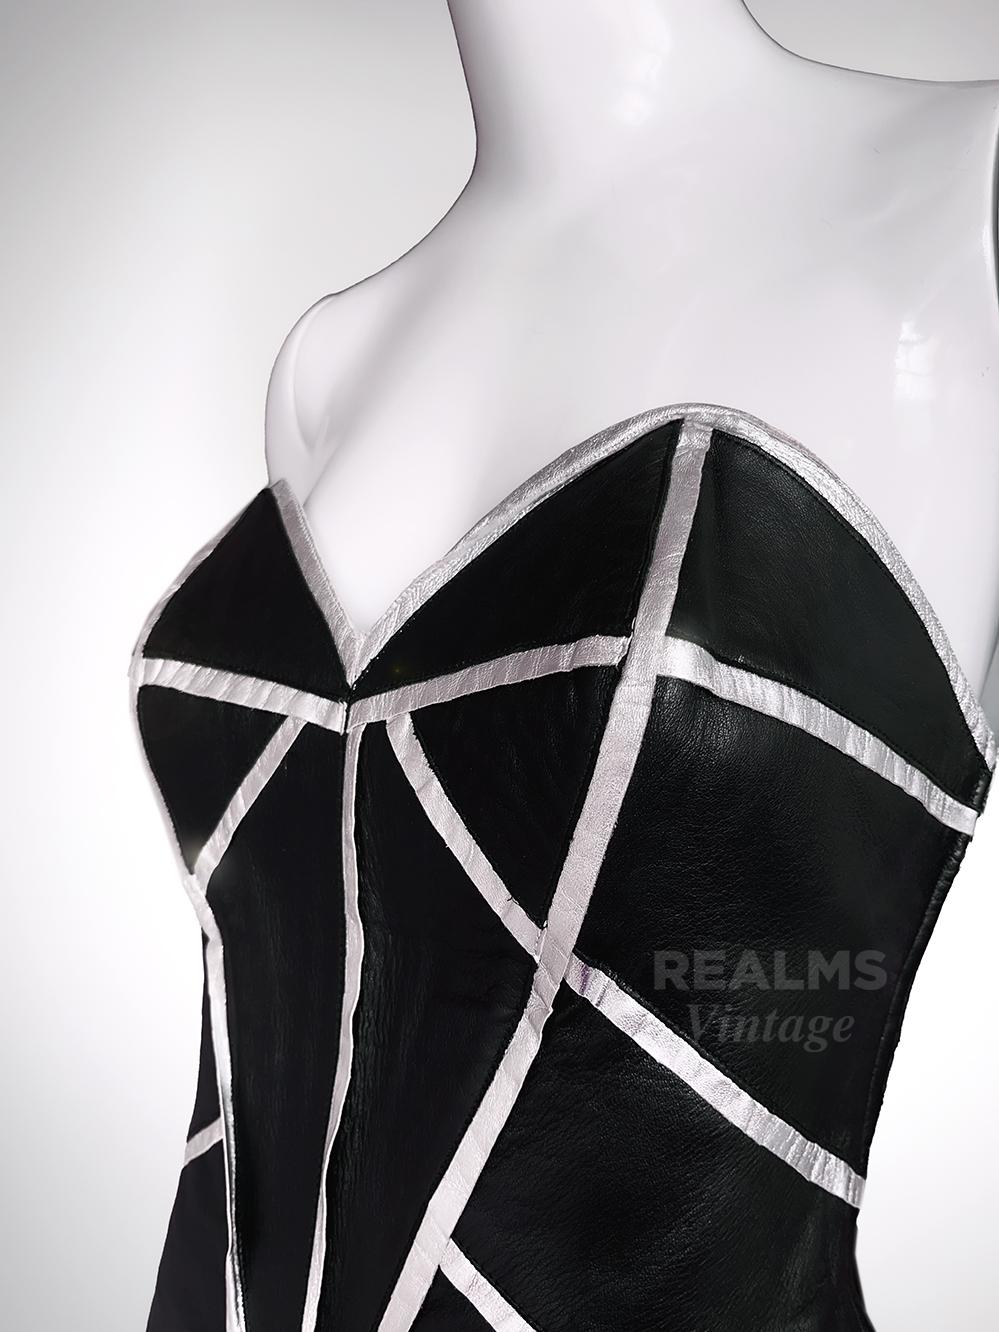 Thierry Mugler Couture 2001 Archival Leather Corset Top Bustier For Sale 1